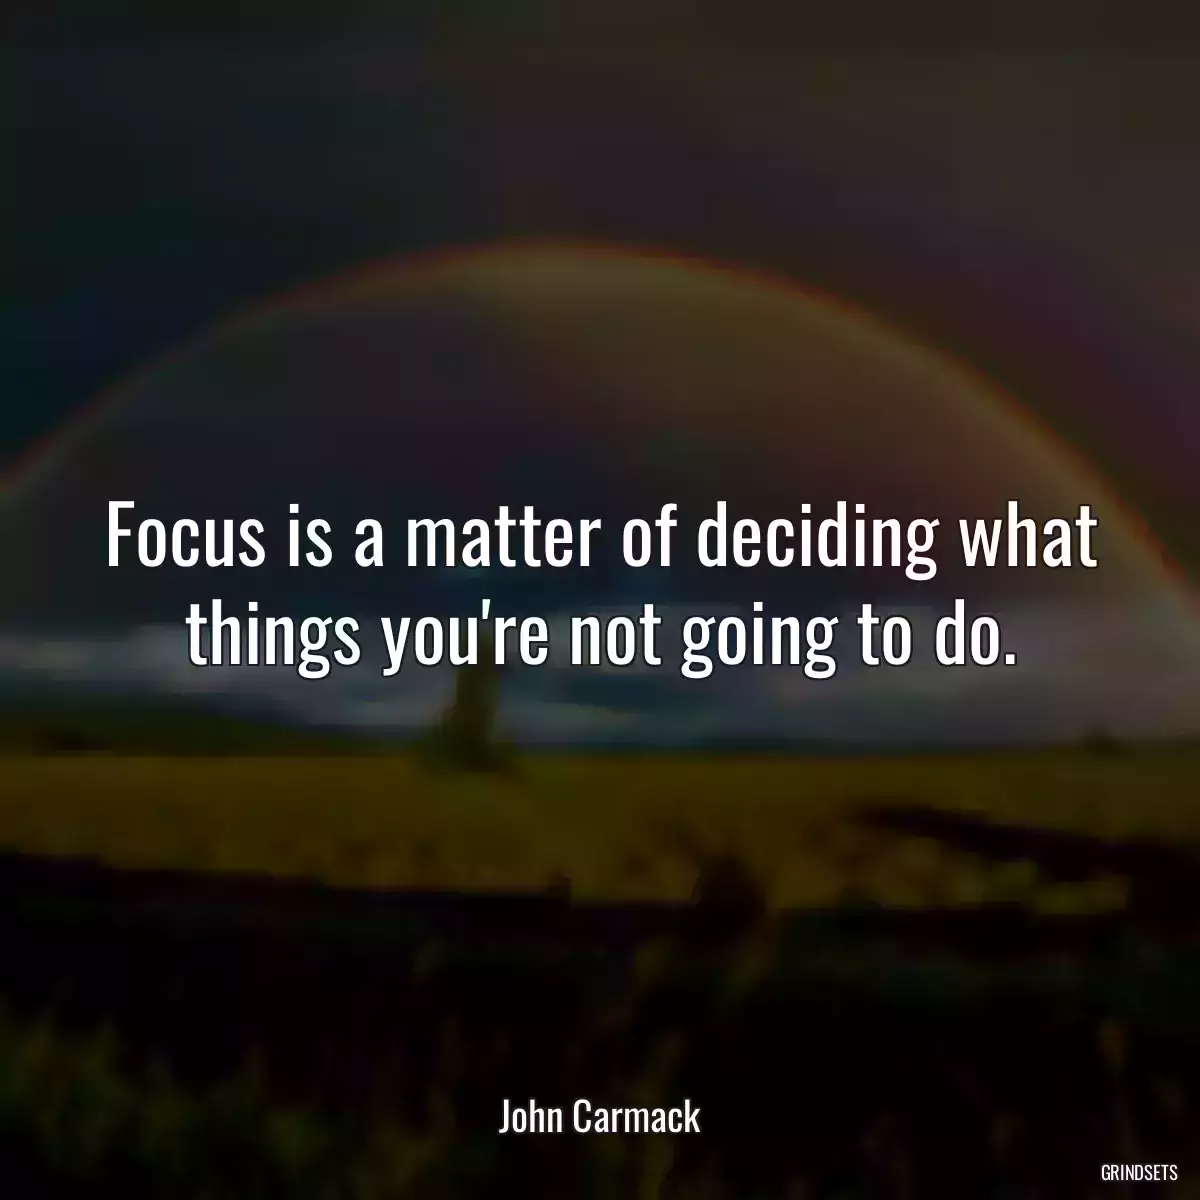 Focus is a matter of deciding what things you\'re not going to do.